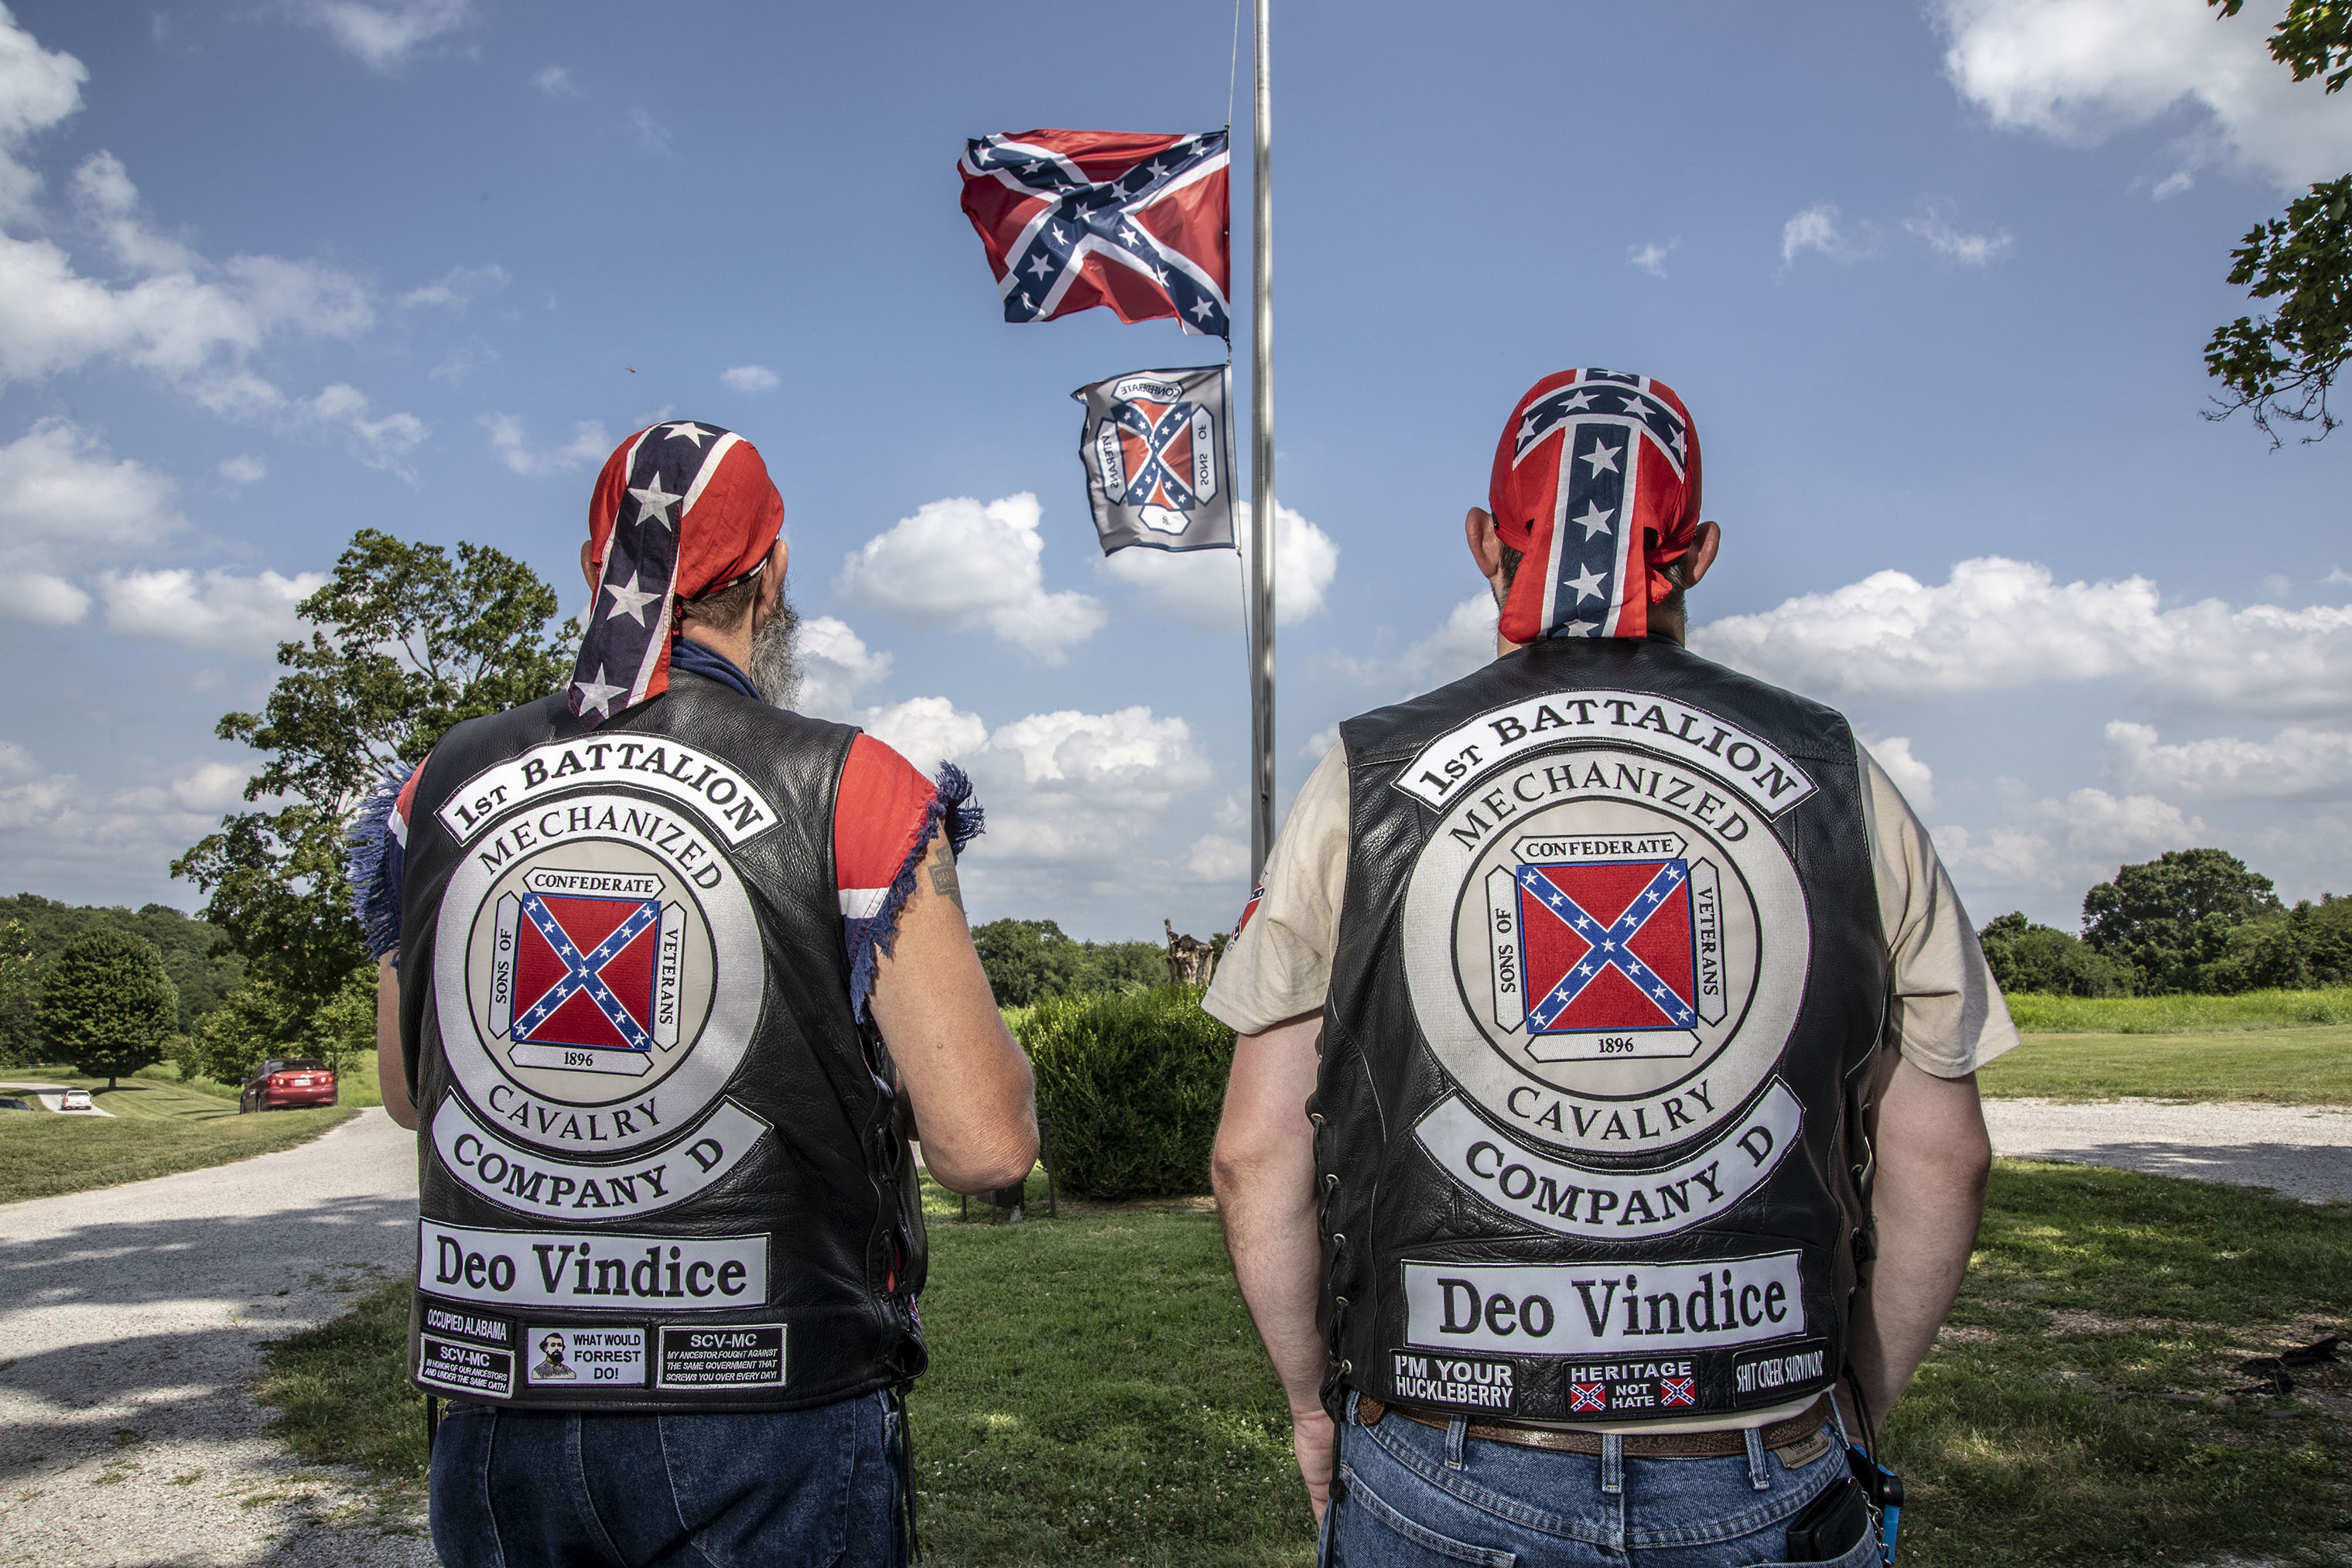 Attendees at the dedication of the National Confederate Museum in Elm Springs, Tenn., on July 20, 2018. (Mark Peterson—Redux for TIME)